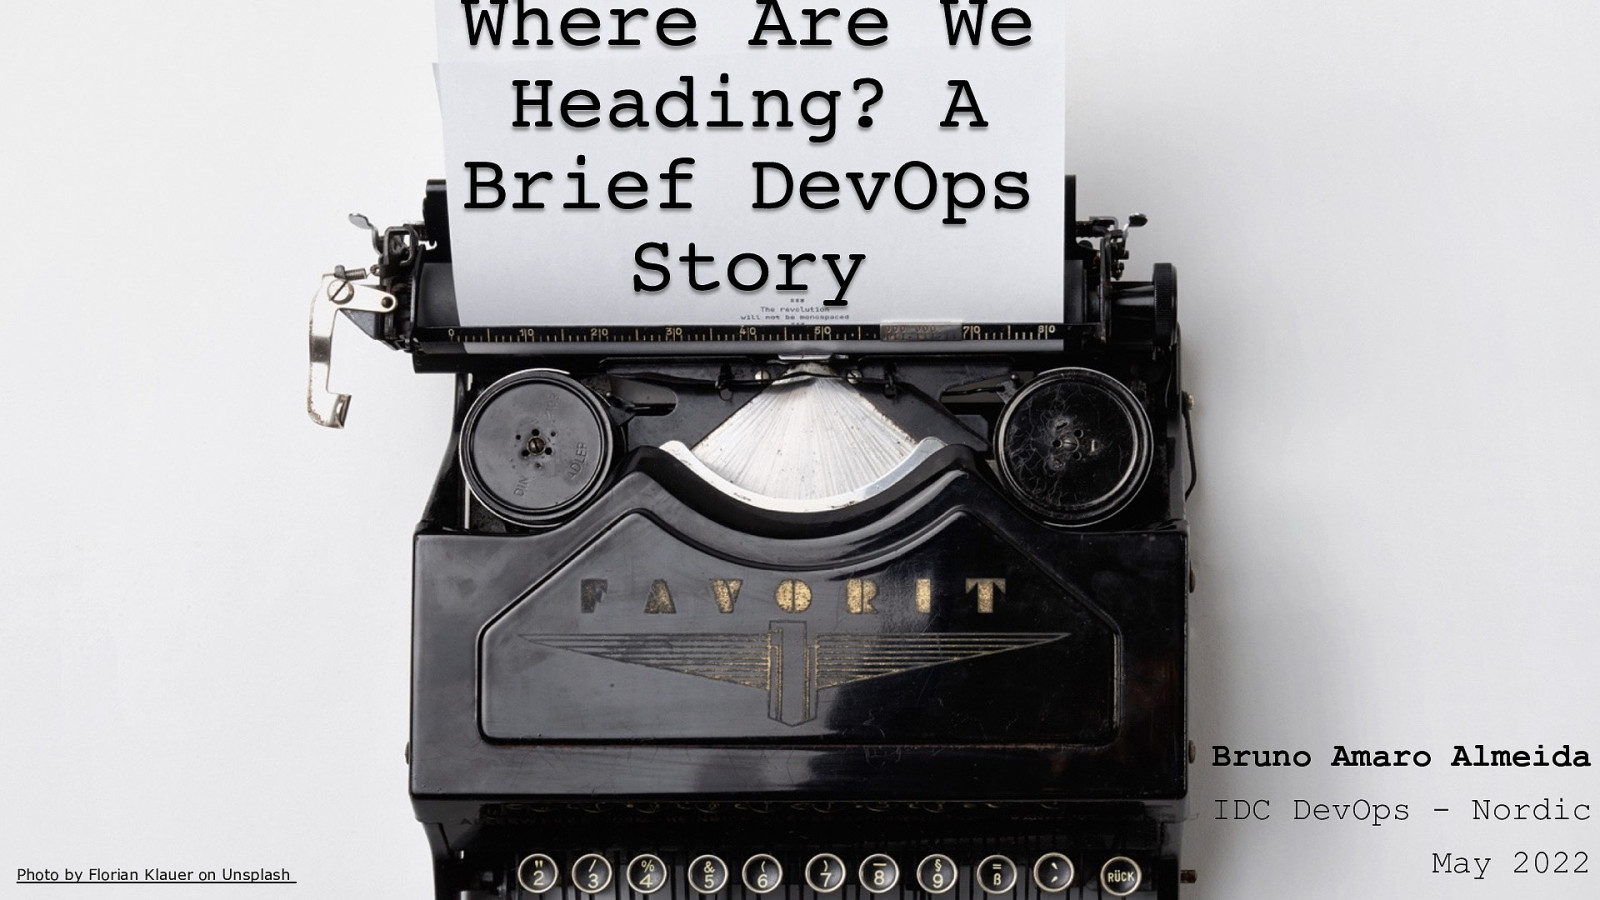 Where Are We Heading? A Brief DevOps Story